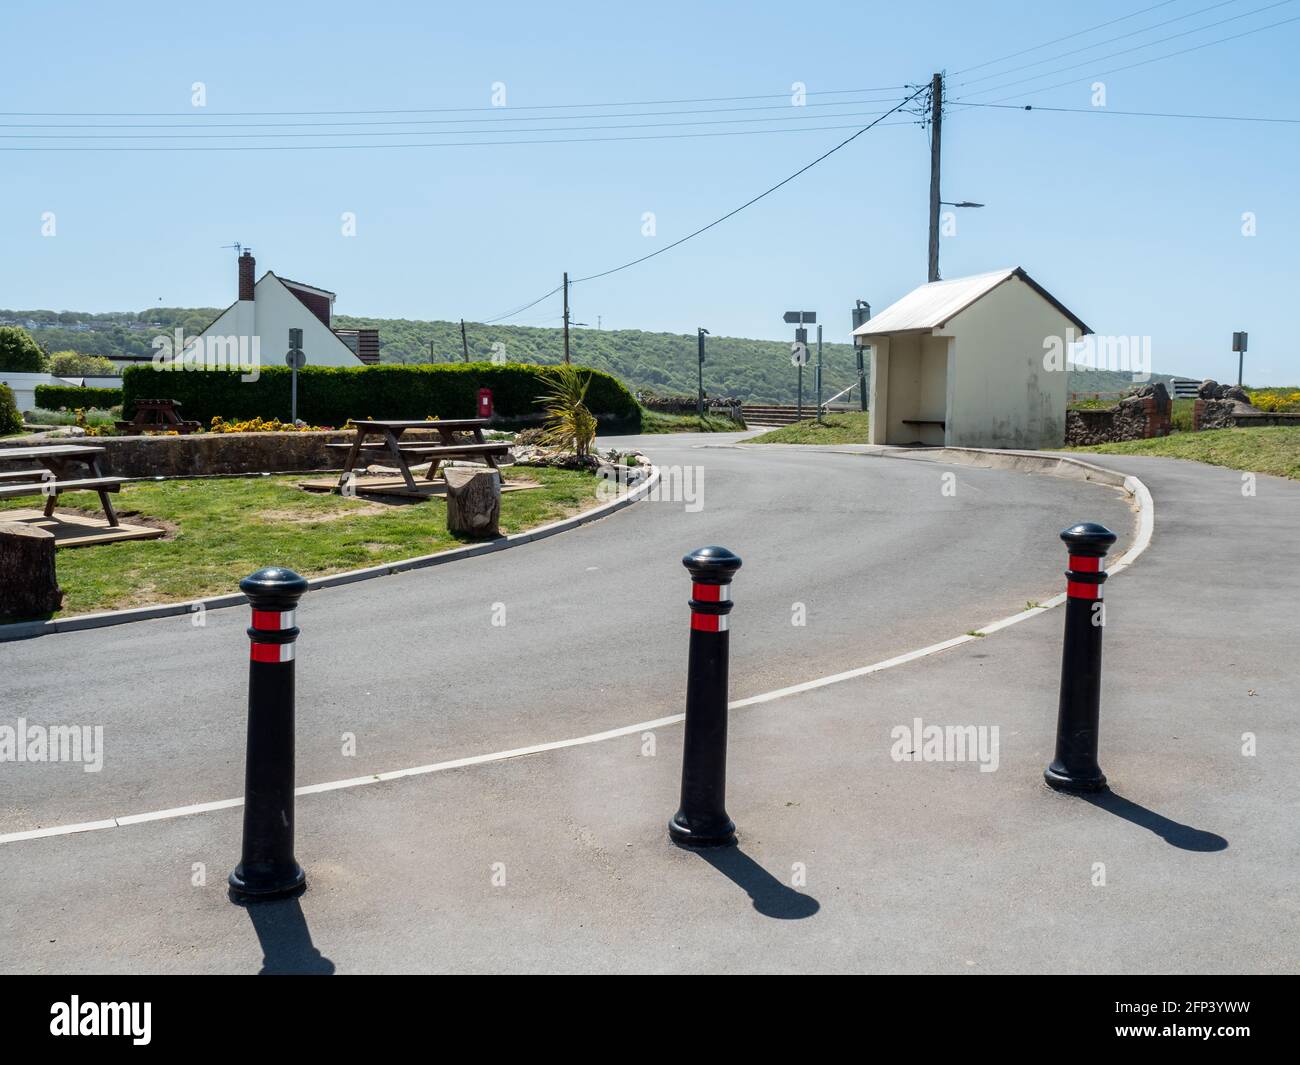 The Bus Stop and Shelter at Sand Bay, near Weston-super-Mare, in North Somerset, UK. Stock Photo